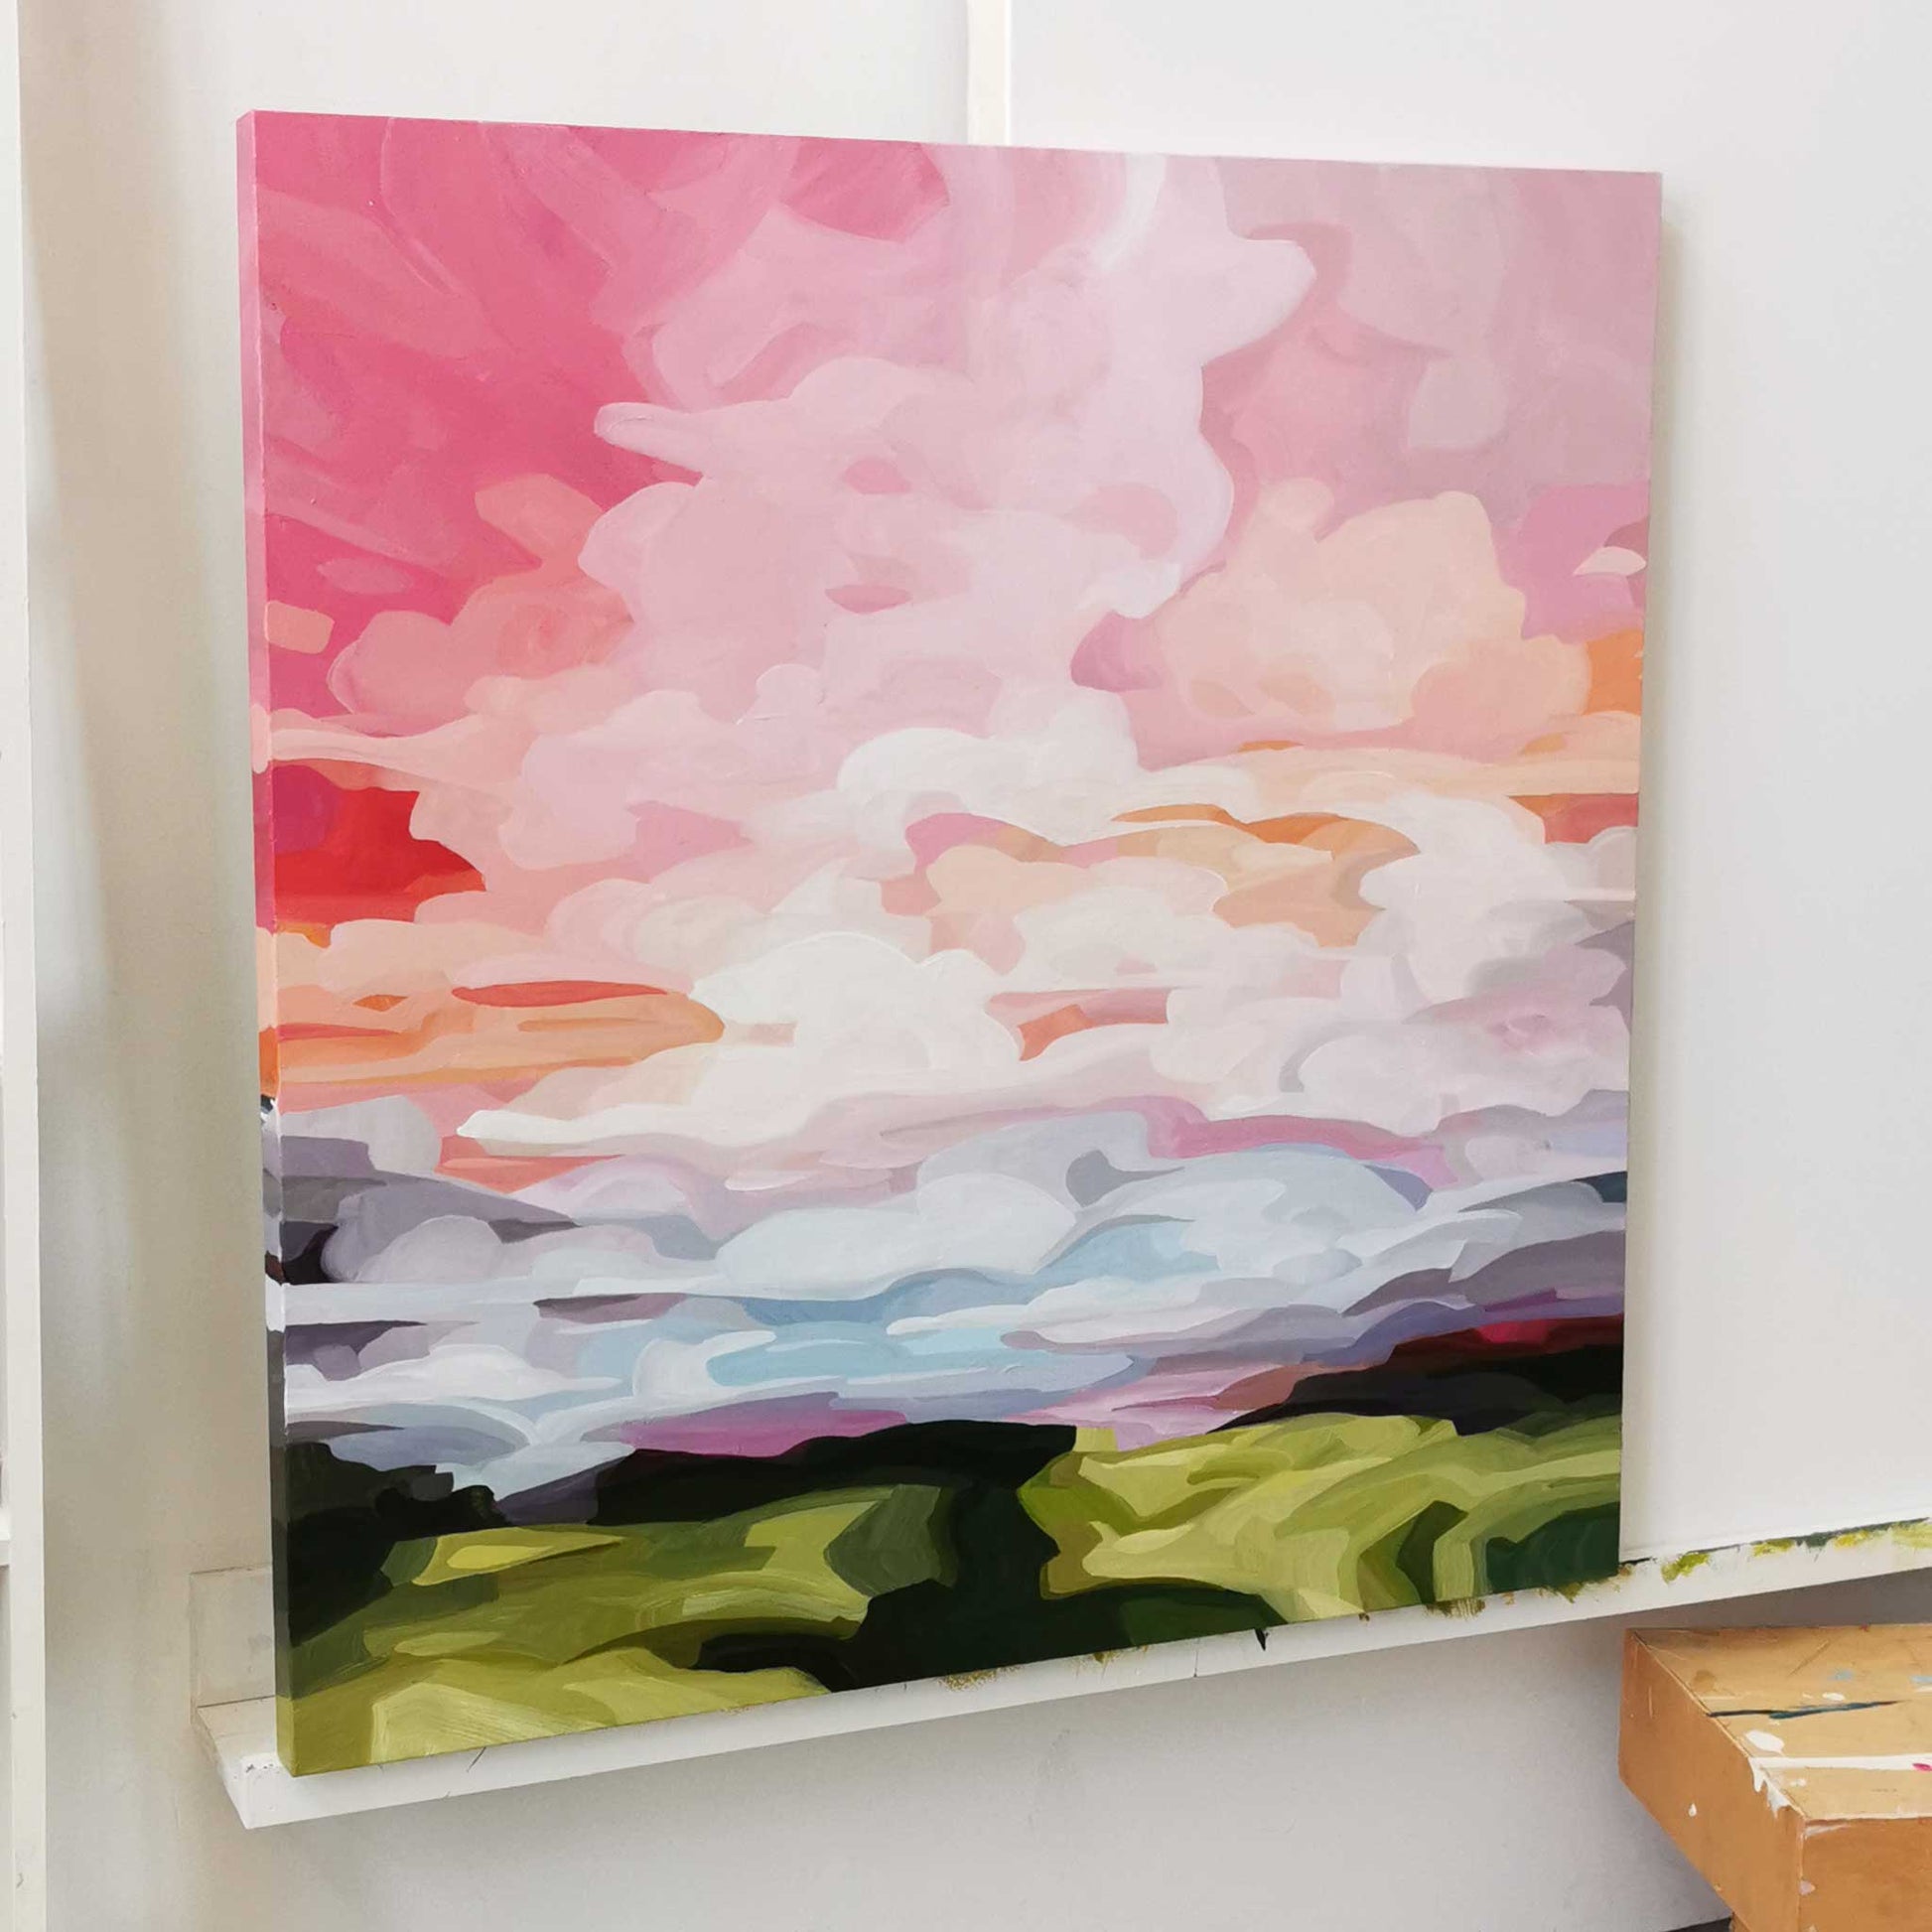 Acrylic sky painting large art on canvas in bright colours by Canadian artist Susannah Bleasby